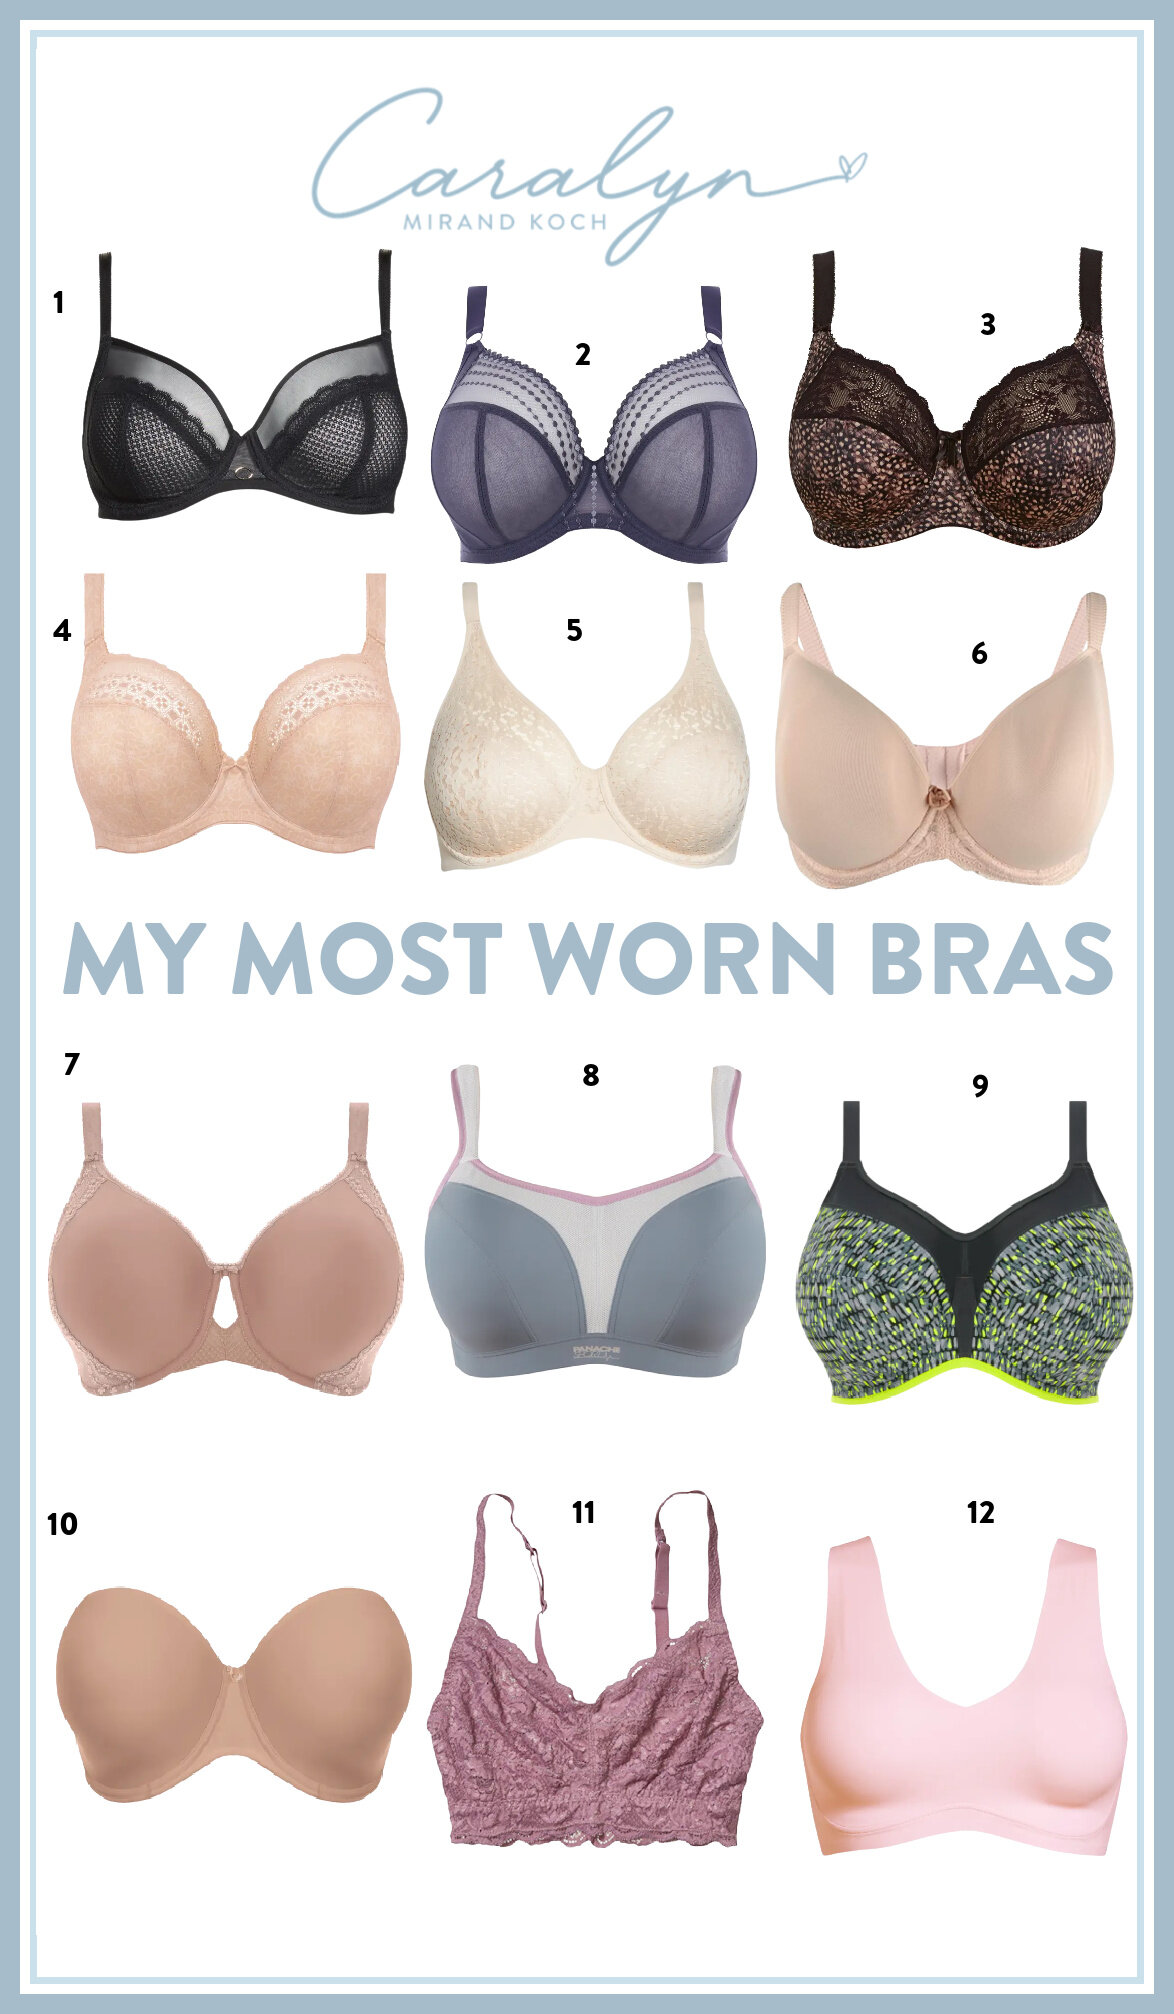 15 Undergarment Solutions: Your Questions Answered — Caralyn Mirand Koch